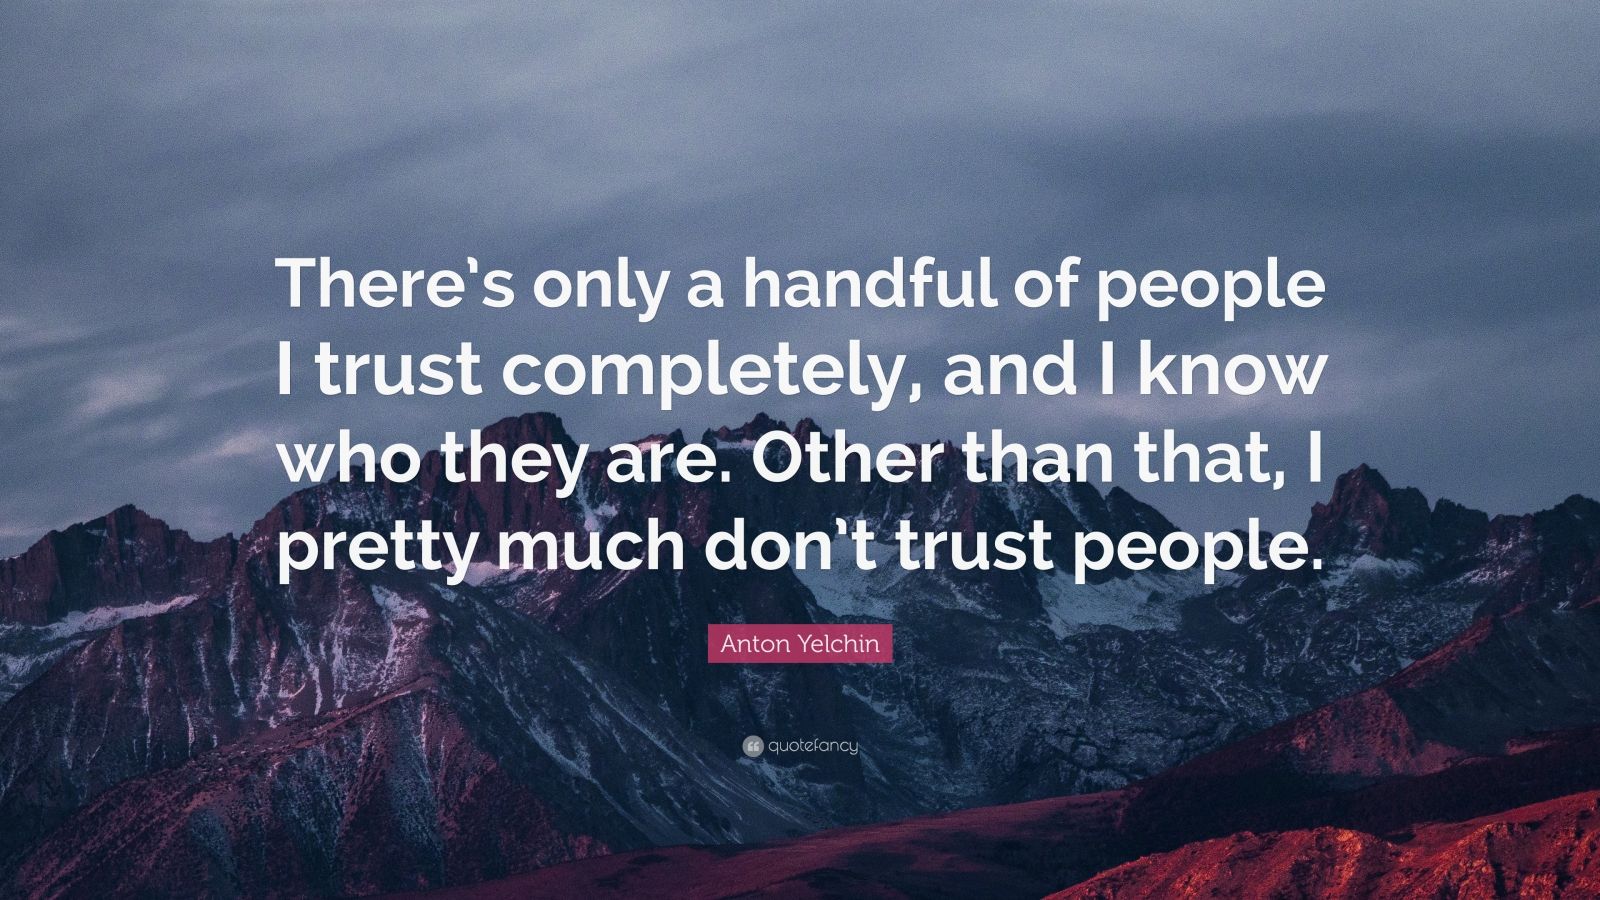 Anton Yelchin Quote: “There’s only a handful of people I trust ...